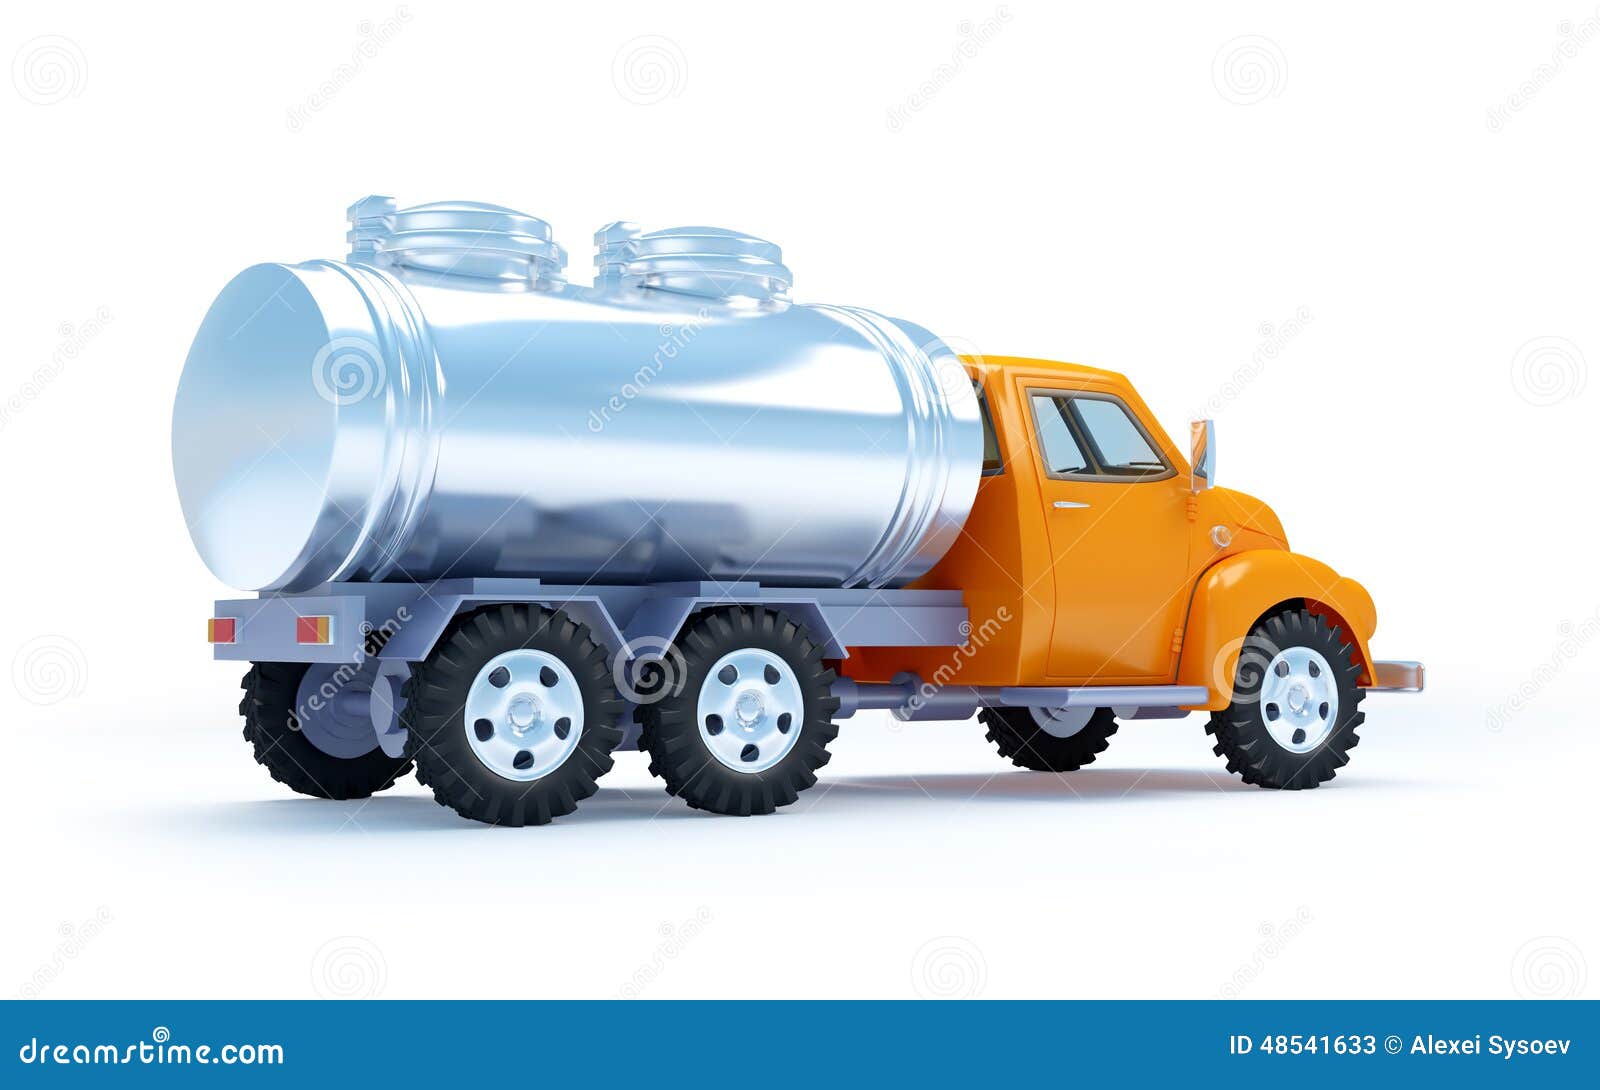 Cartoon tanker truck back stock illustration. Image of container - 48541633